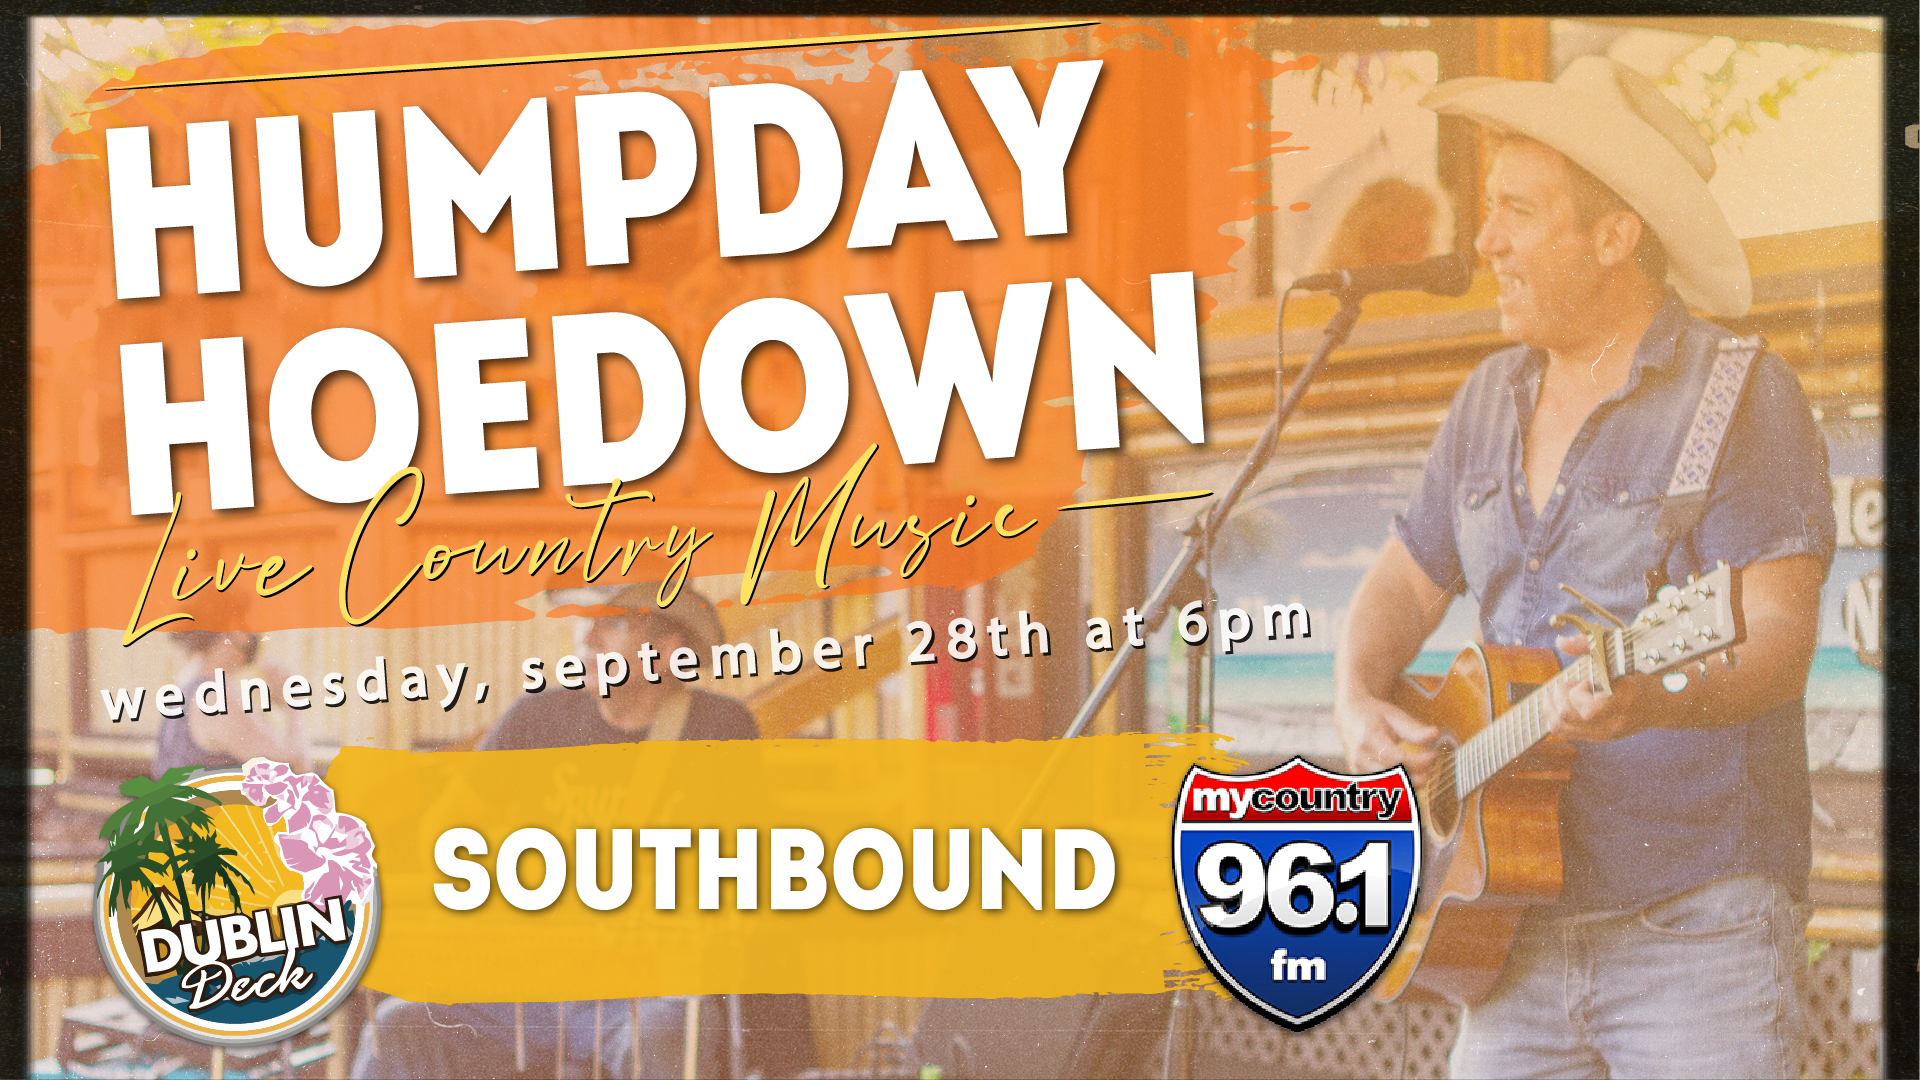 Humpday Hoedown with Soundbound September 28th 6 pm